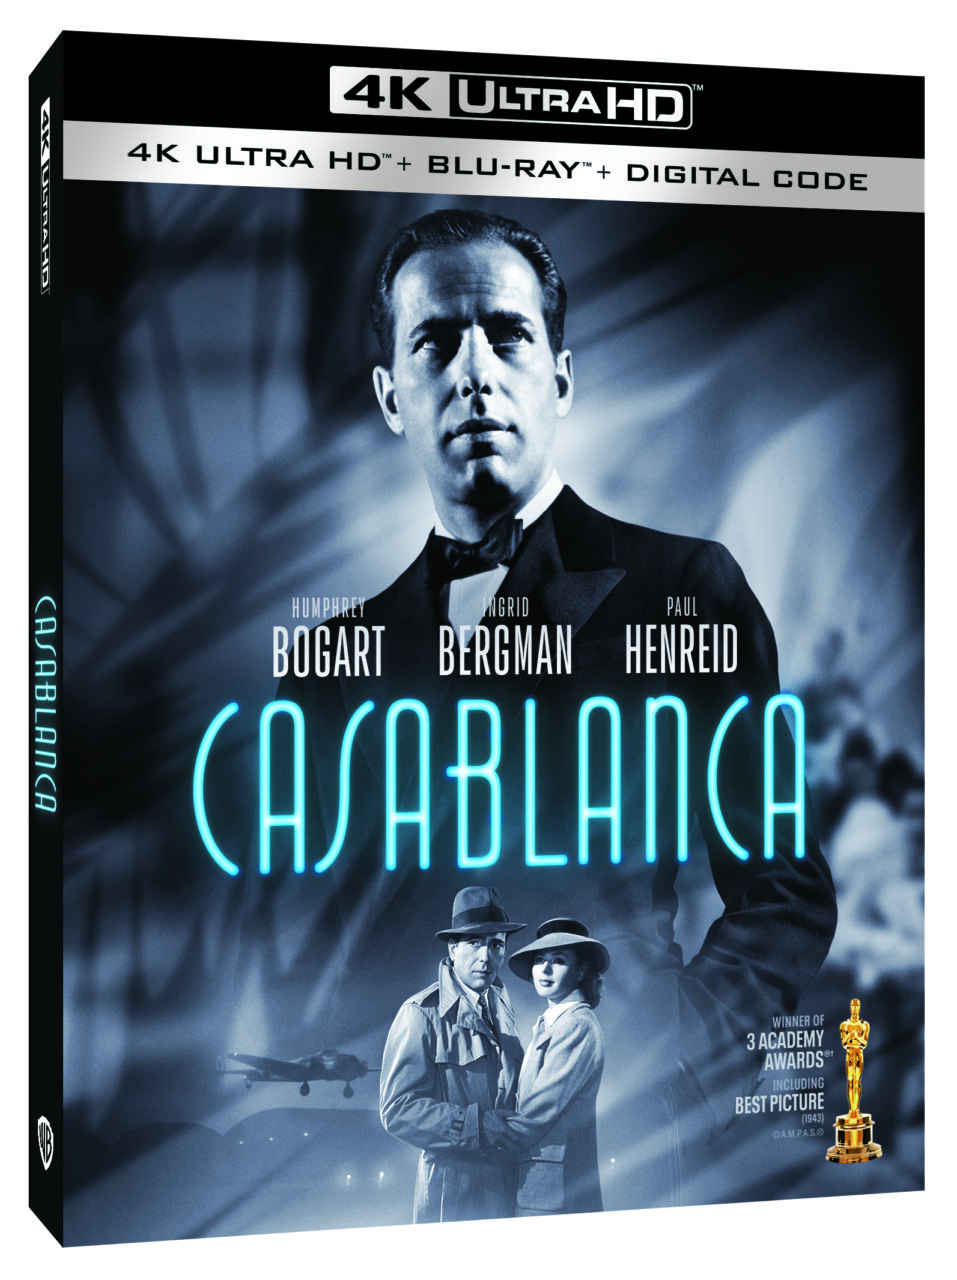 Casablanca 4K Ultra HD Combo Pack cover (Warner Bros. Home Entertainment)